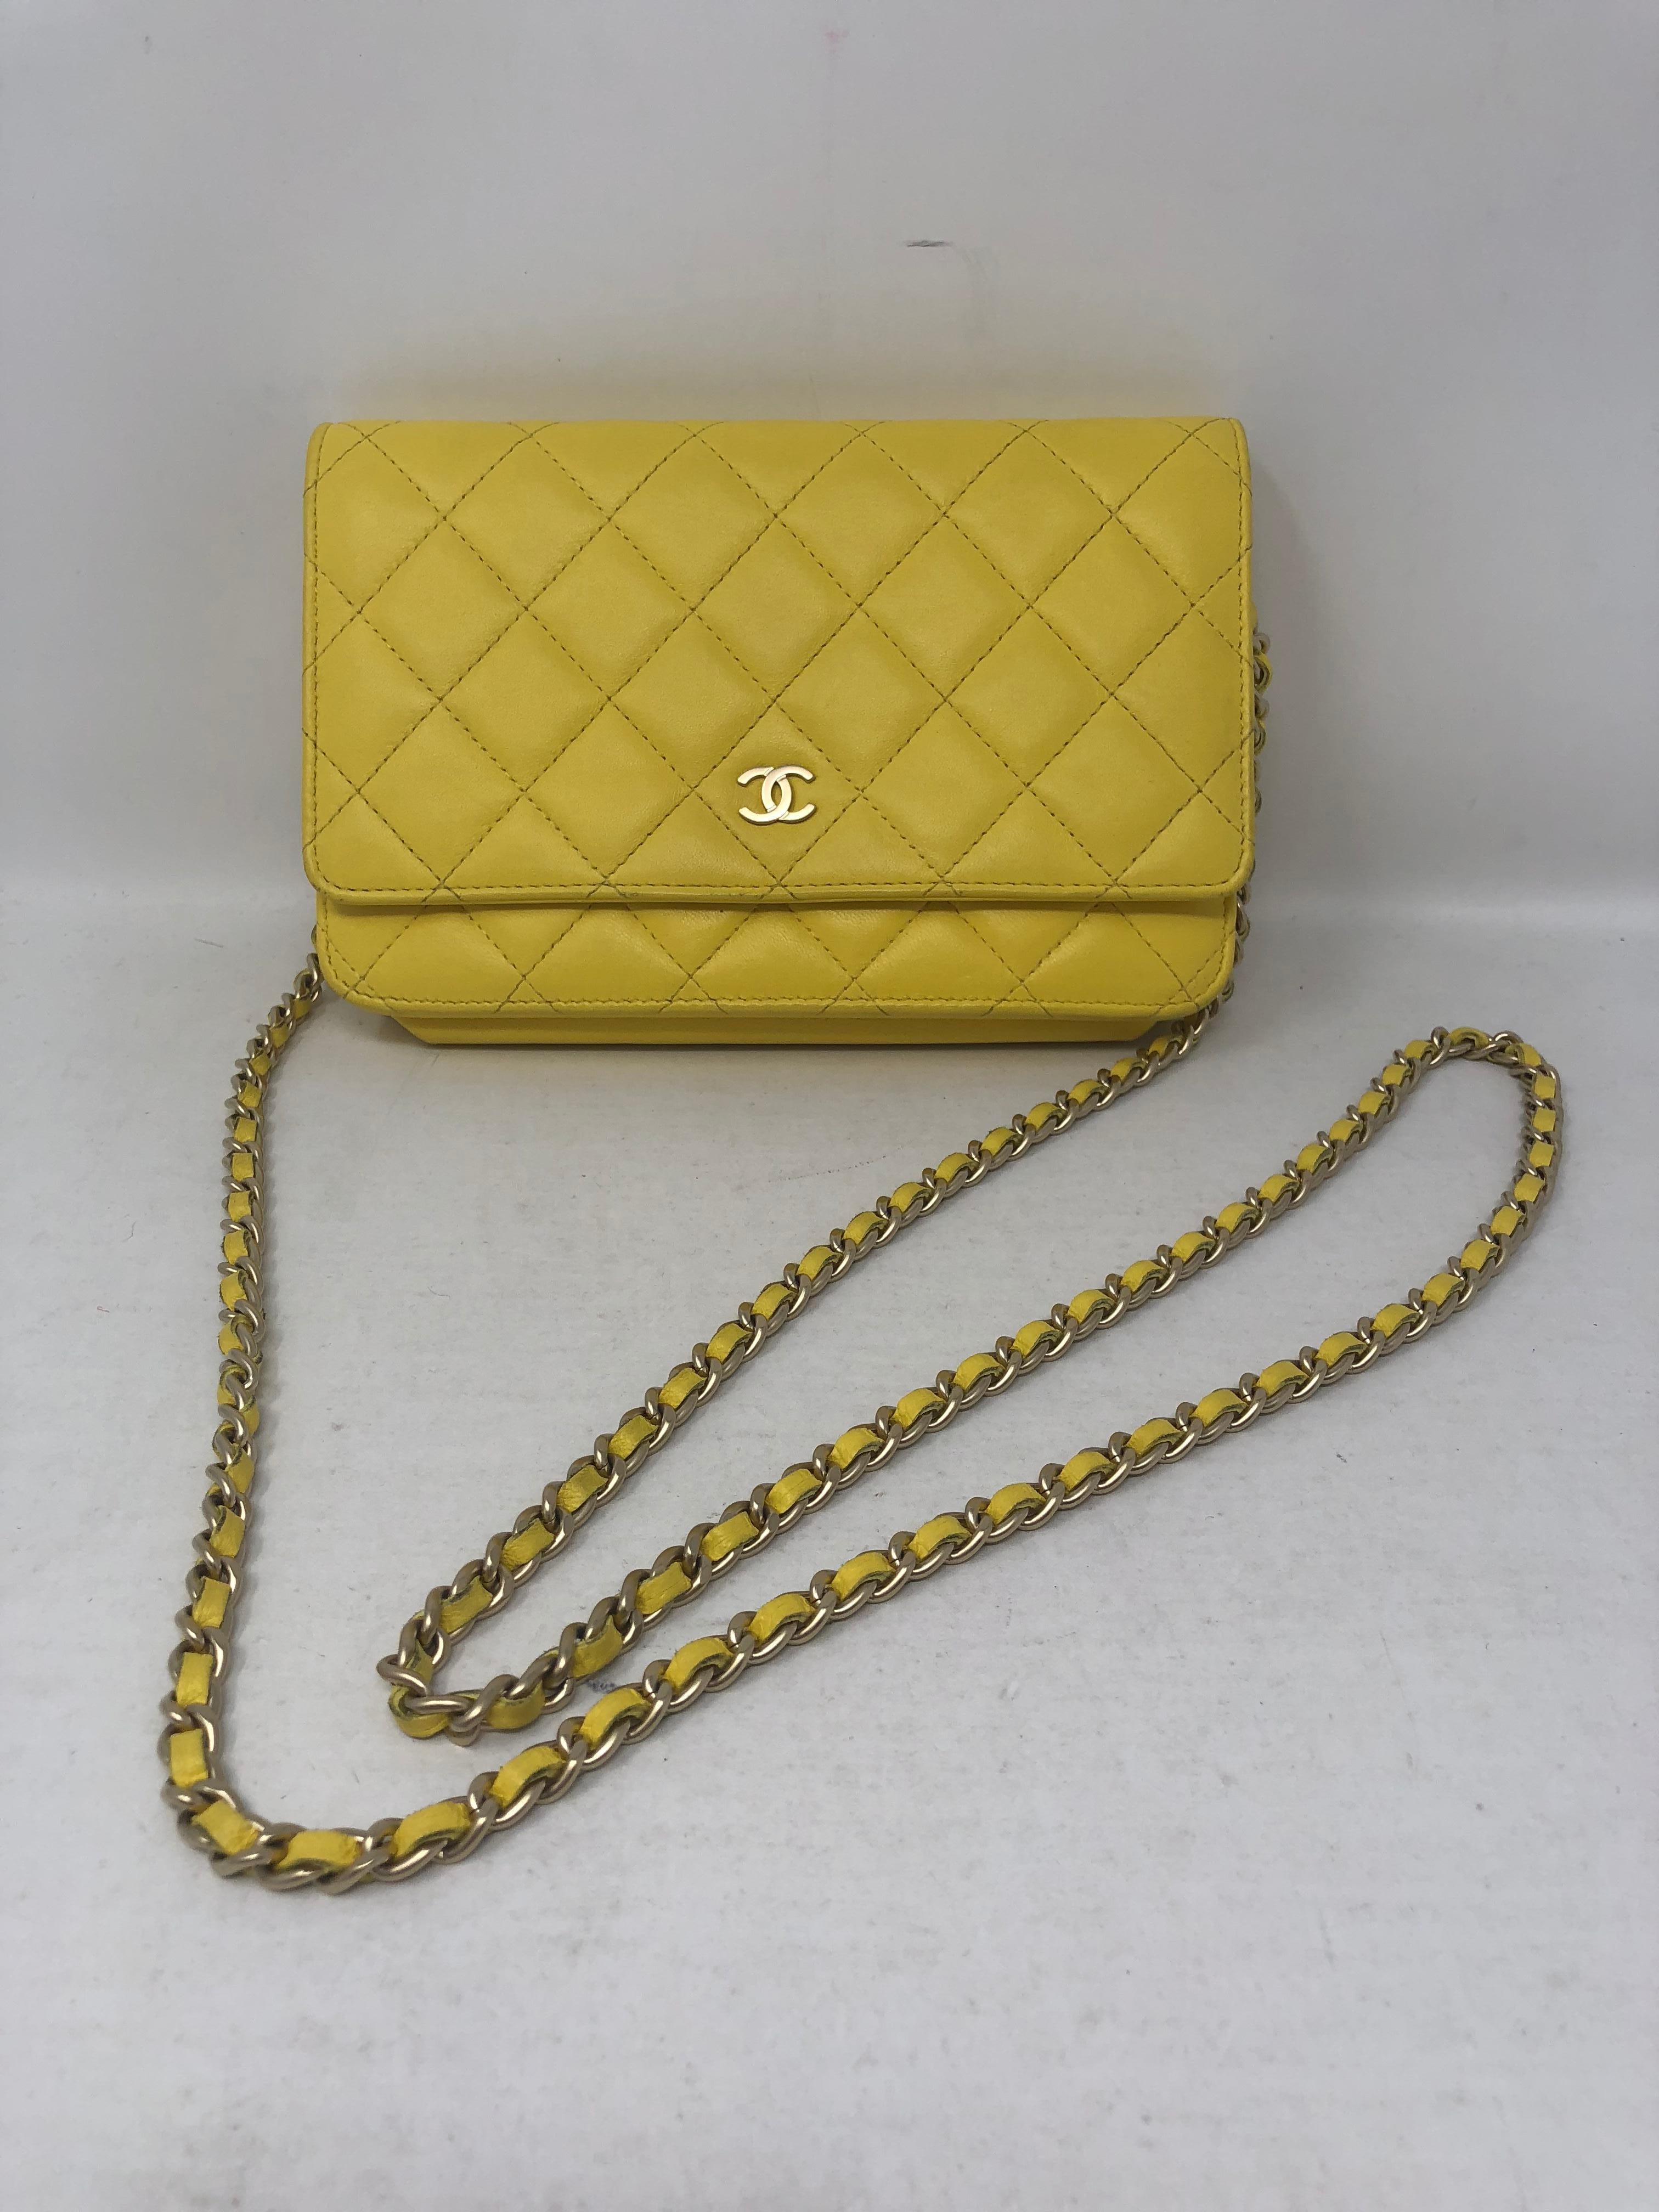 Chanel Yellow Wallet on Chain Crossbody Bag. Bright canary yellow lambskin leather with silver hardware. Good condition. Most wanted crossbody by Chanel. Includes authenticity card and original dust cover. Guaranteed authentic. 